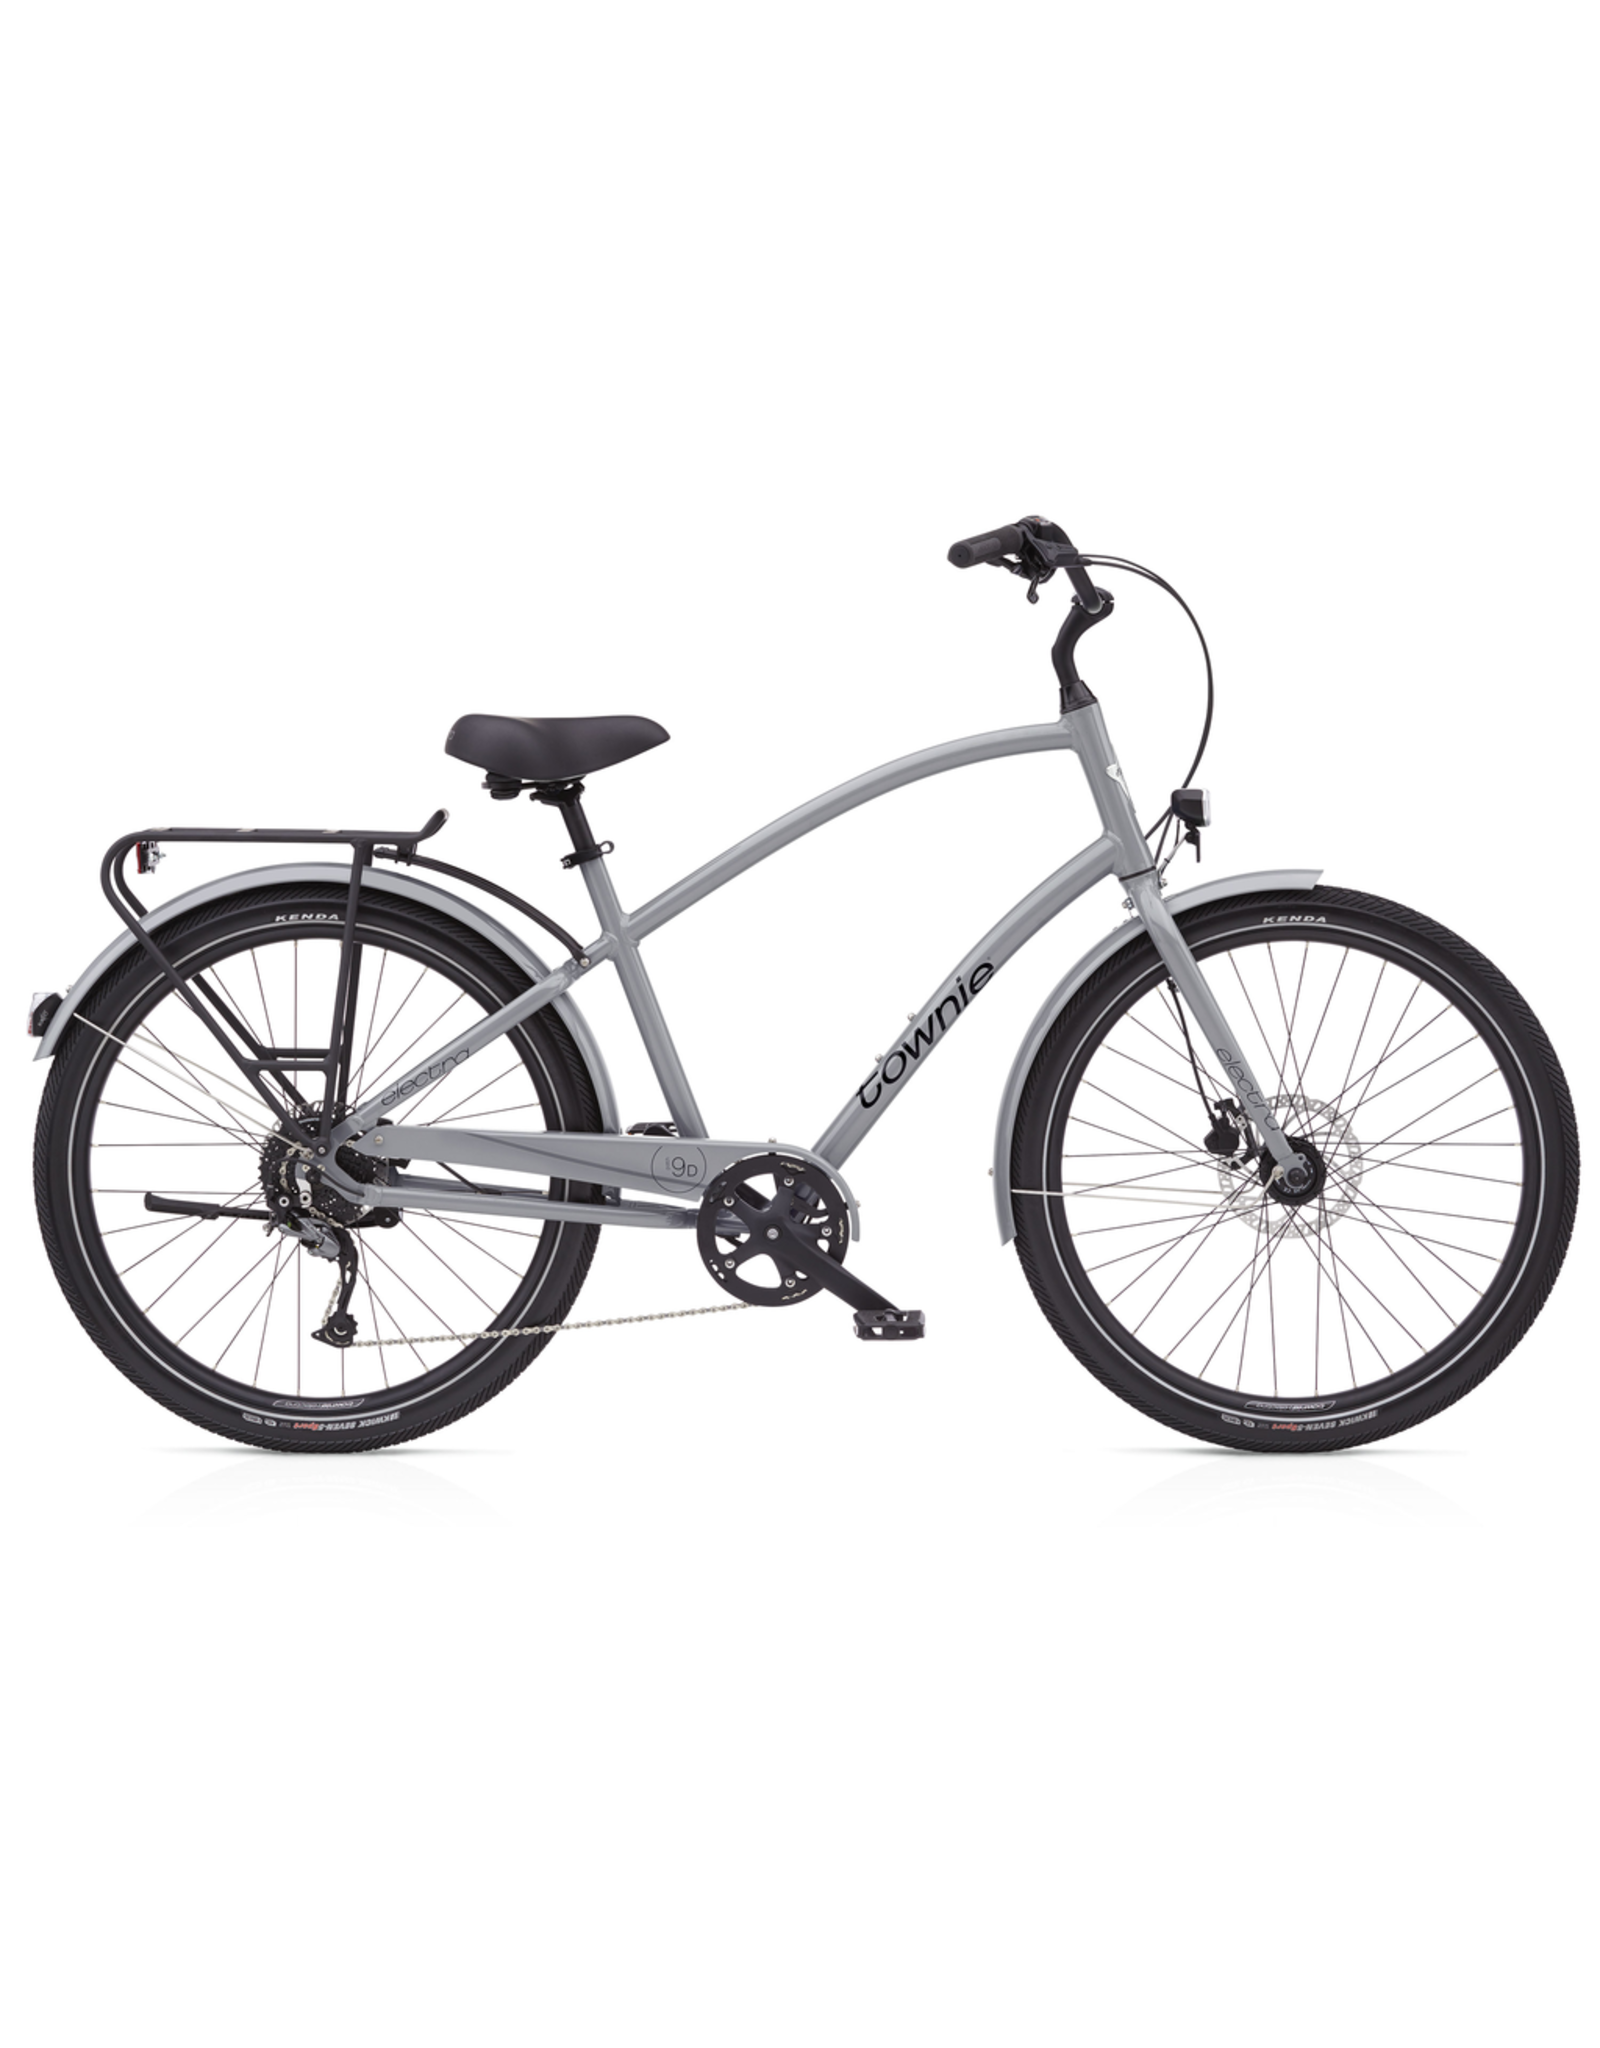 Townie Electra Townie Path 9D EQ Step-Over